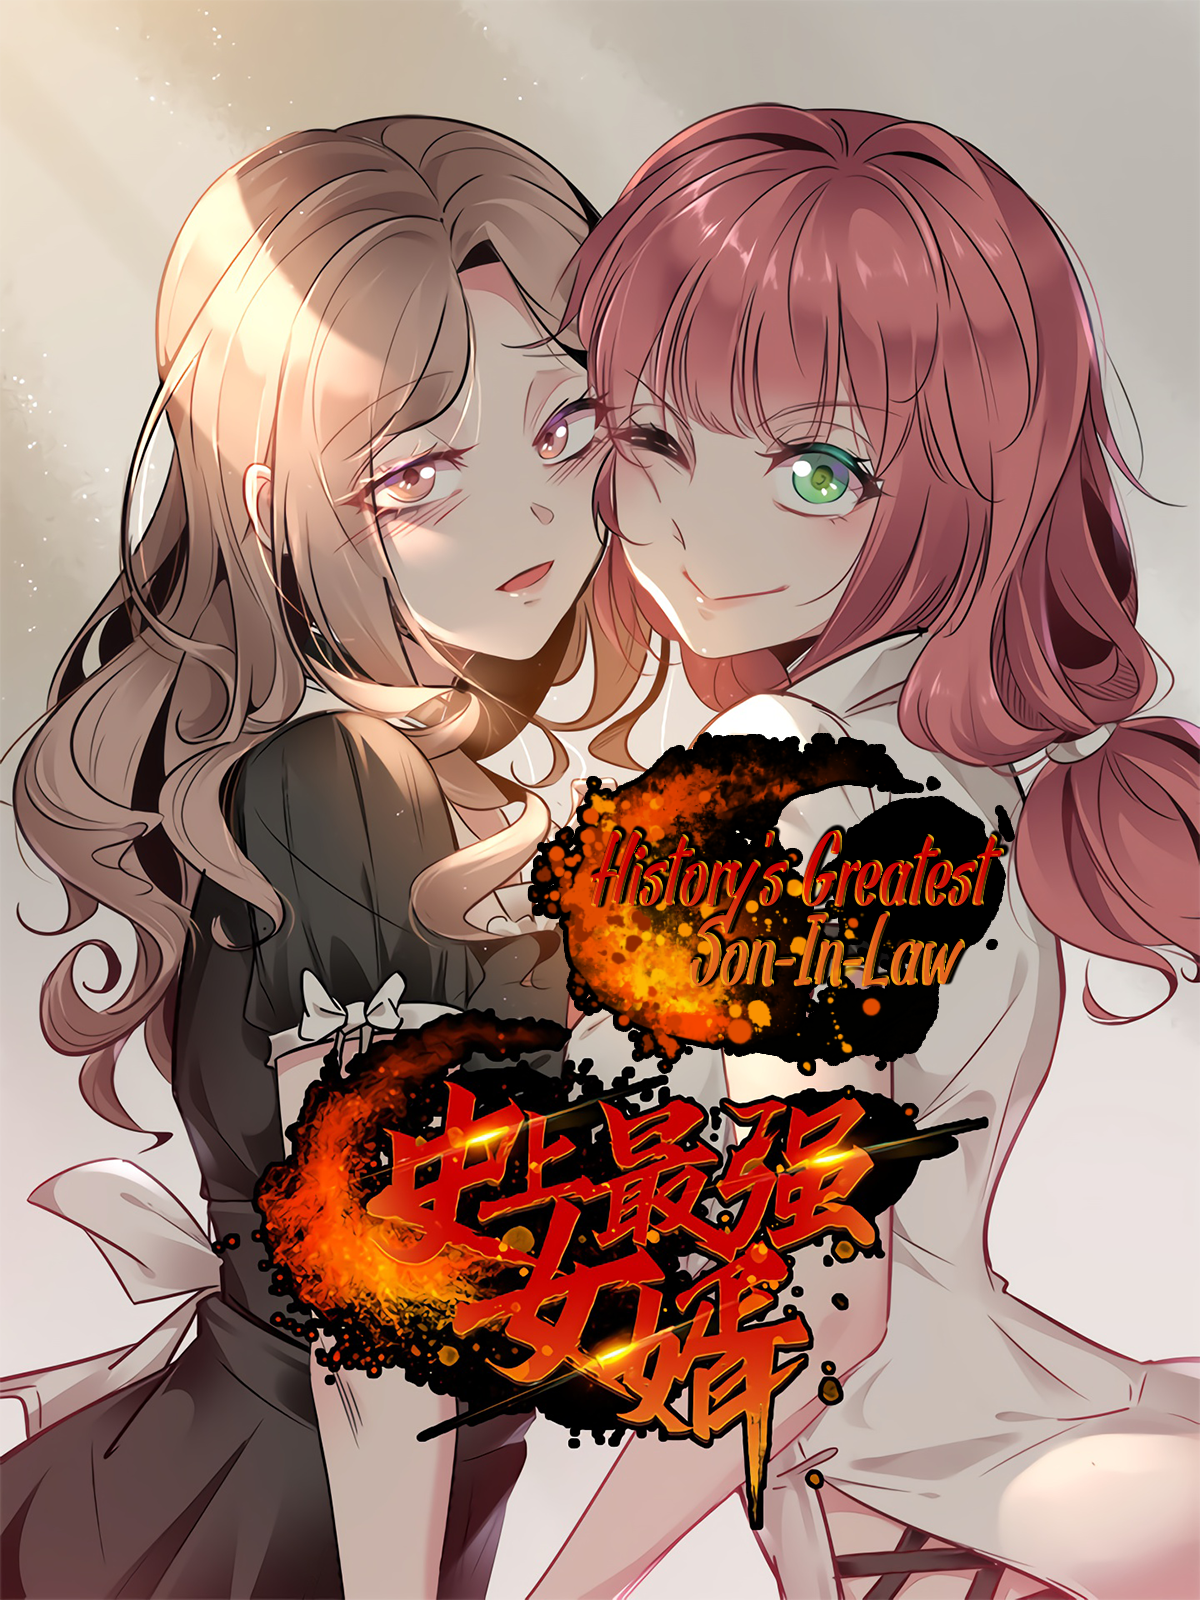 The Strongest Son In Law History's Greatest Son-In-Law read comic online - BILIBILI COMICS